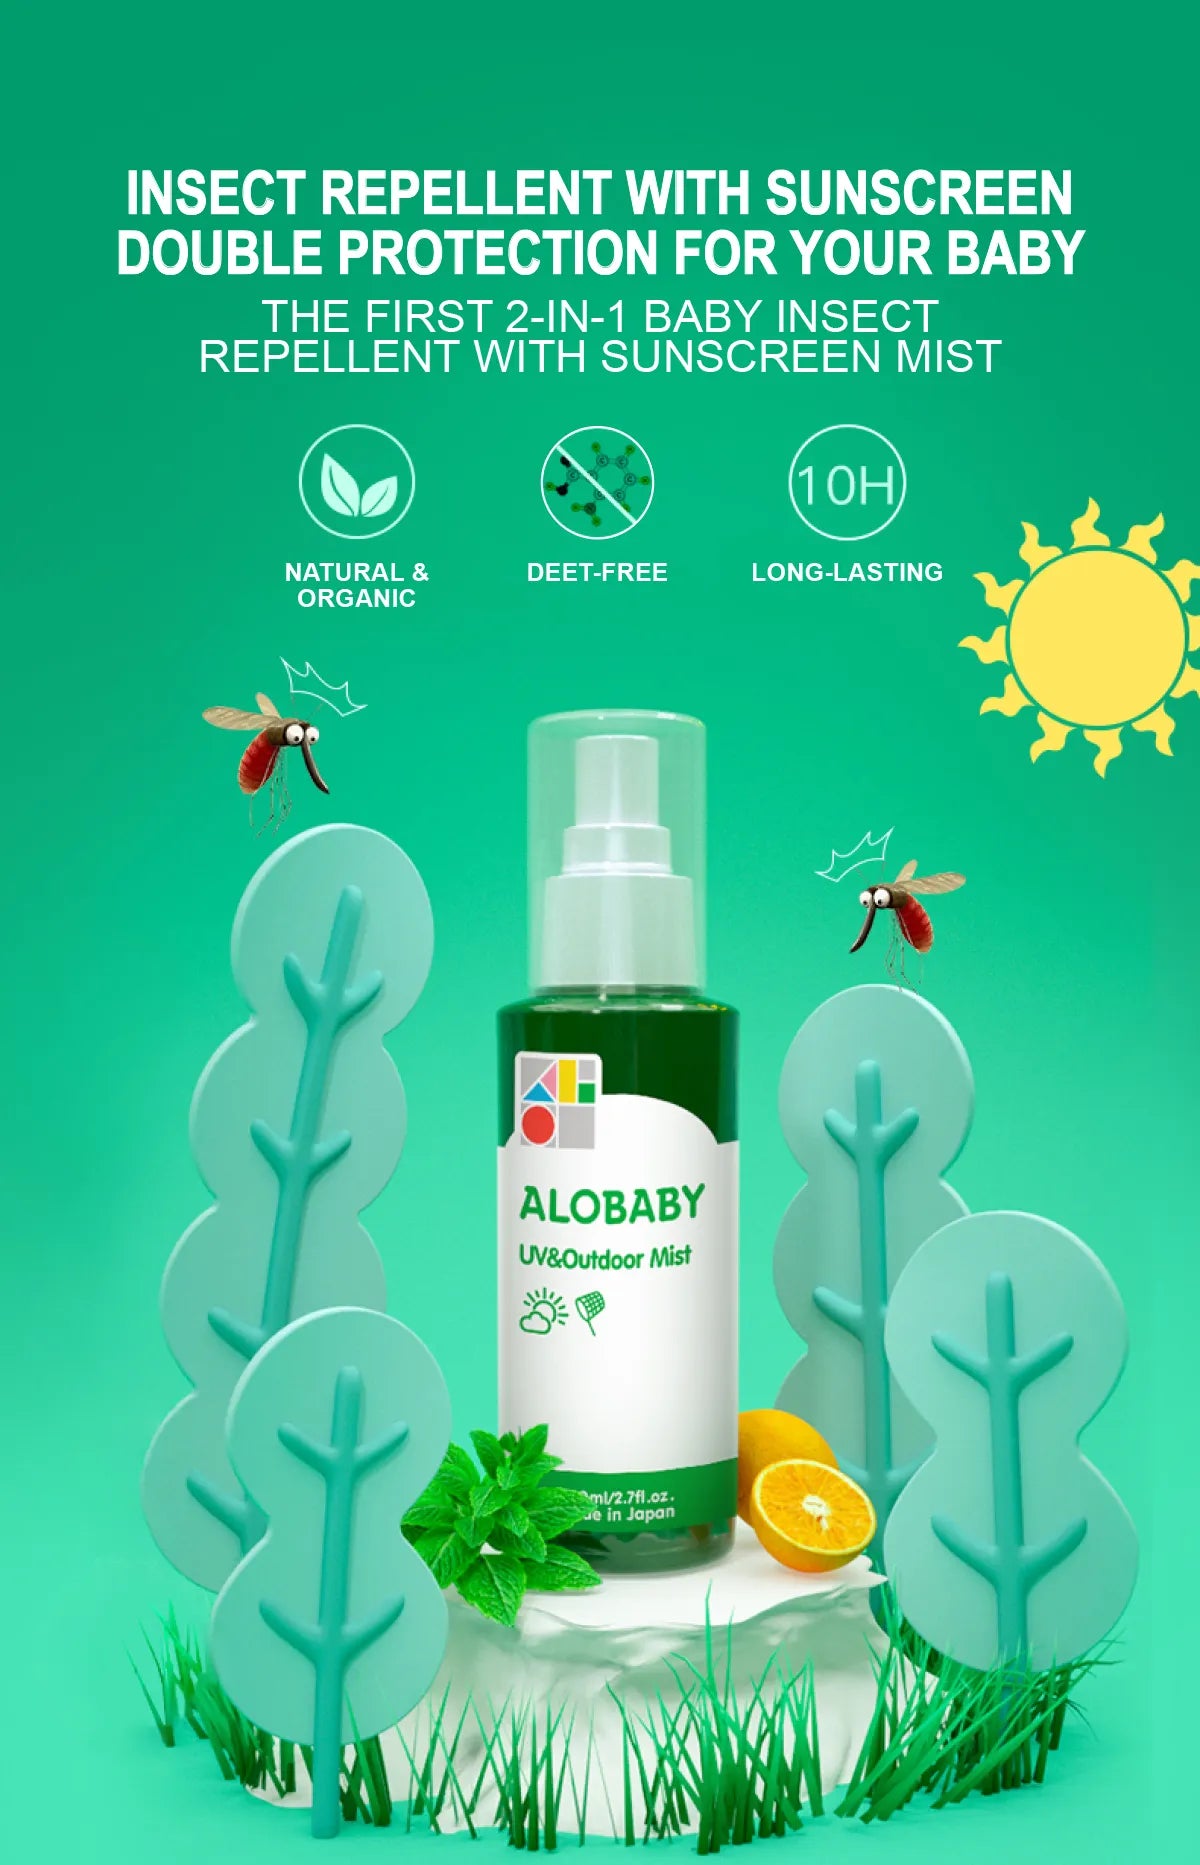 Made-in-Japan organic UV&amp;Outdoor Mist provides UV protection and insects repellent effects. <br data-mce-fragment="1">Our 100% natural formula is DEET-free and does not contain synthetic UV absorber. It does not cause white marks after application. <br data-mce-fragment="1">Portable size in spray form, suitable for outdoor use.